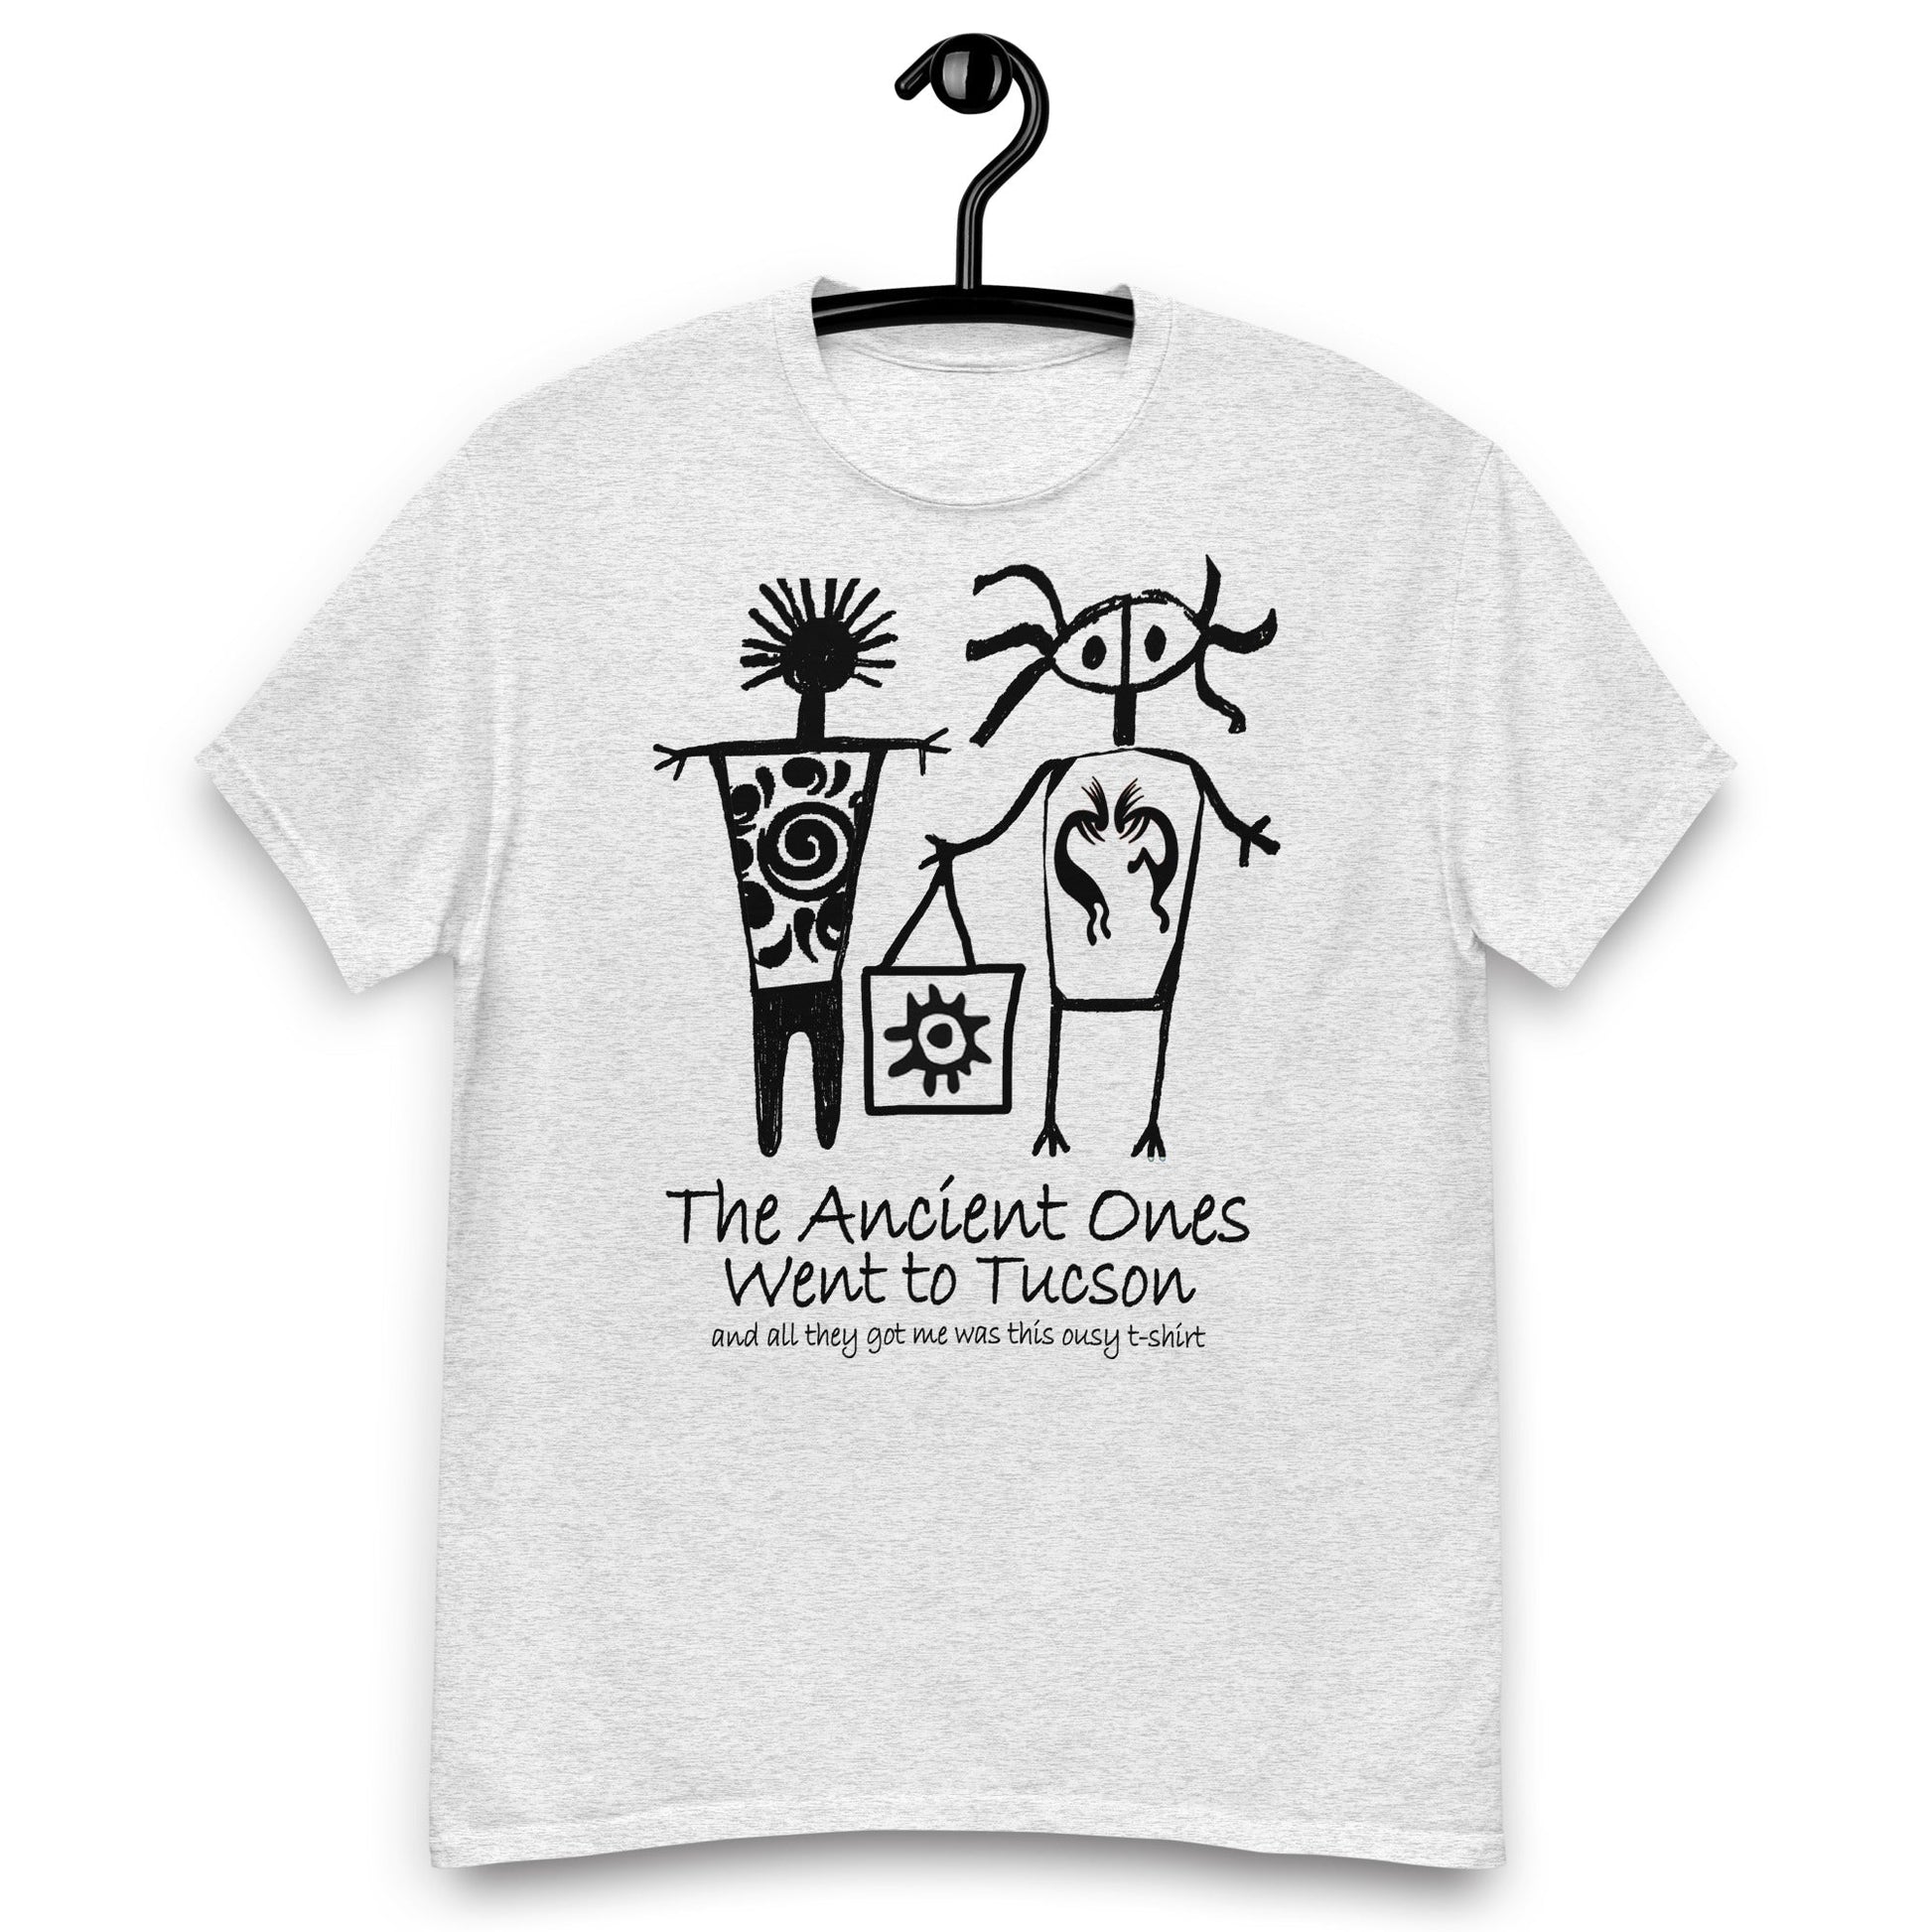 The Ancients Ones Went to Tuscon and All They Got Me was this Lousy T-Shirt